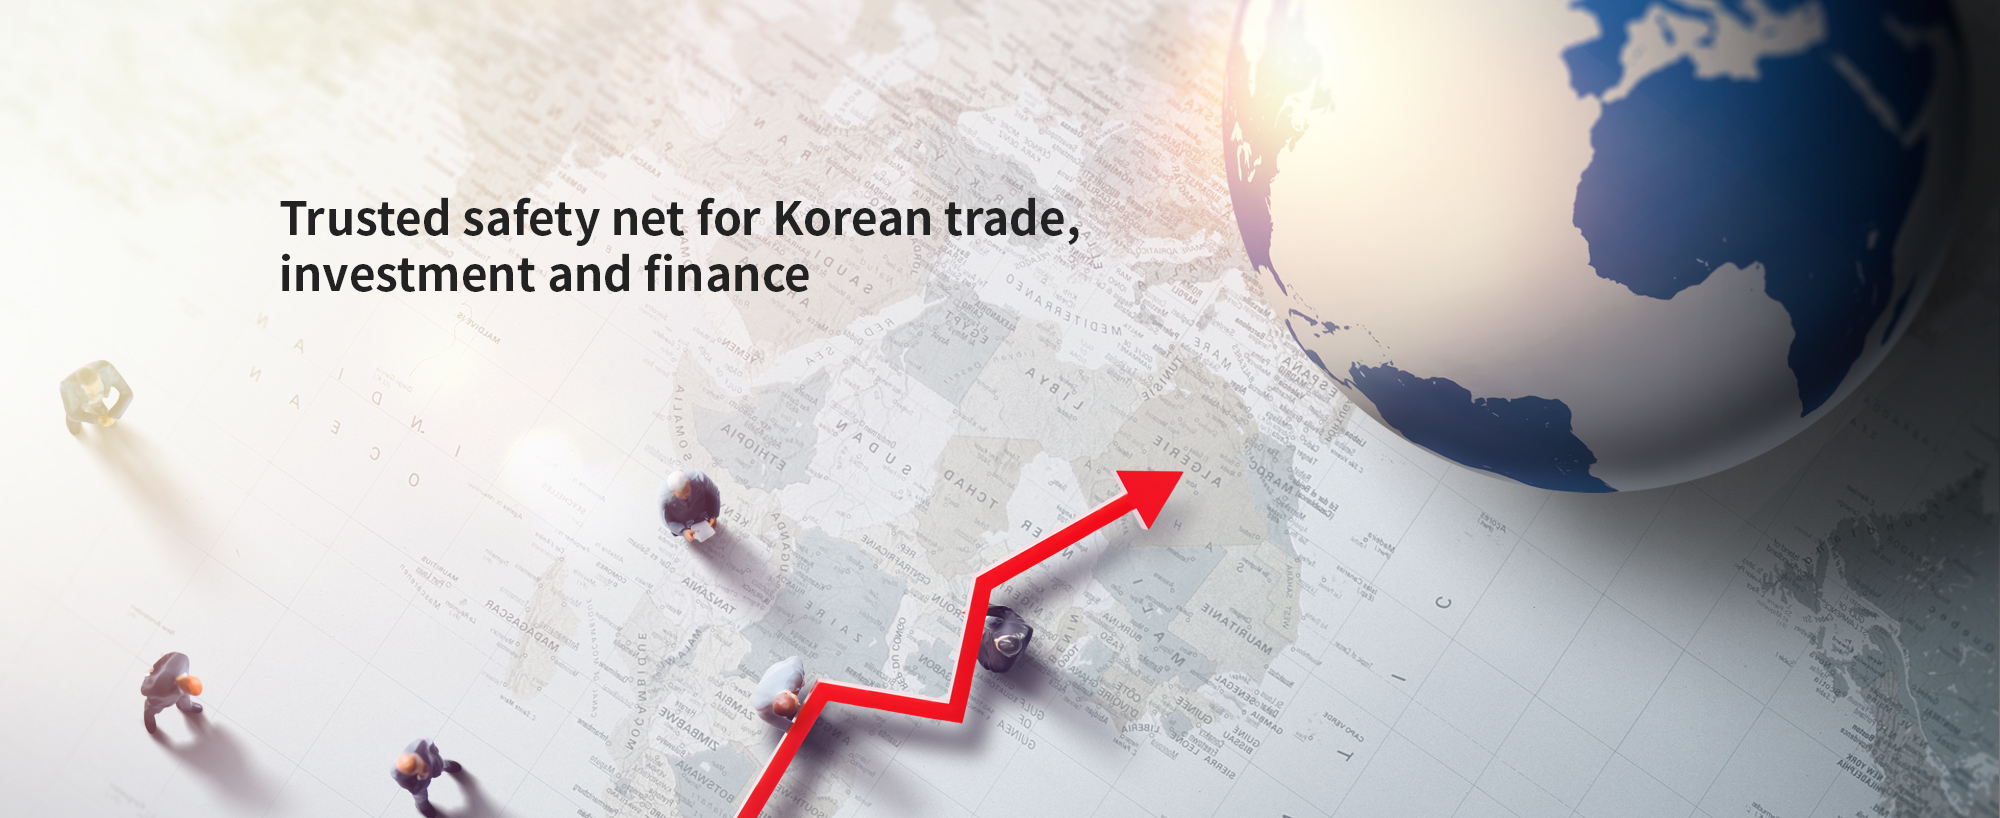 Trust safety net for korean trade, investment and finance